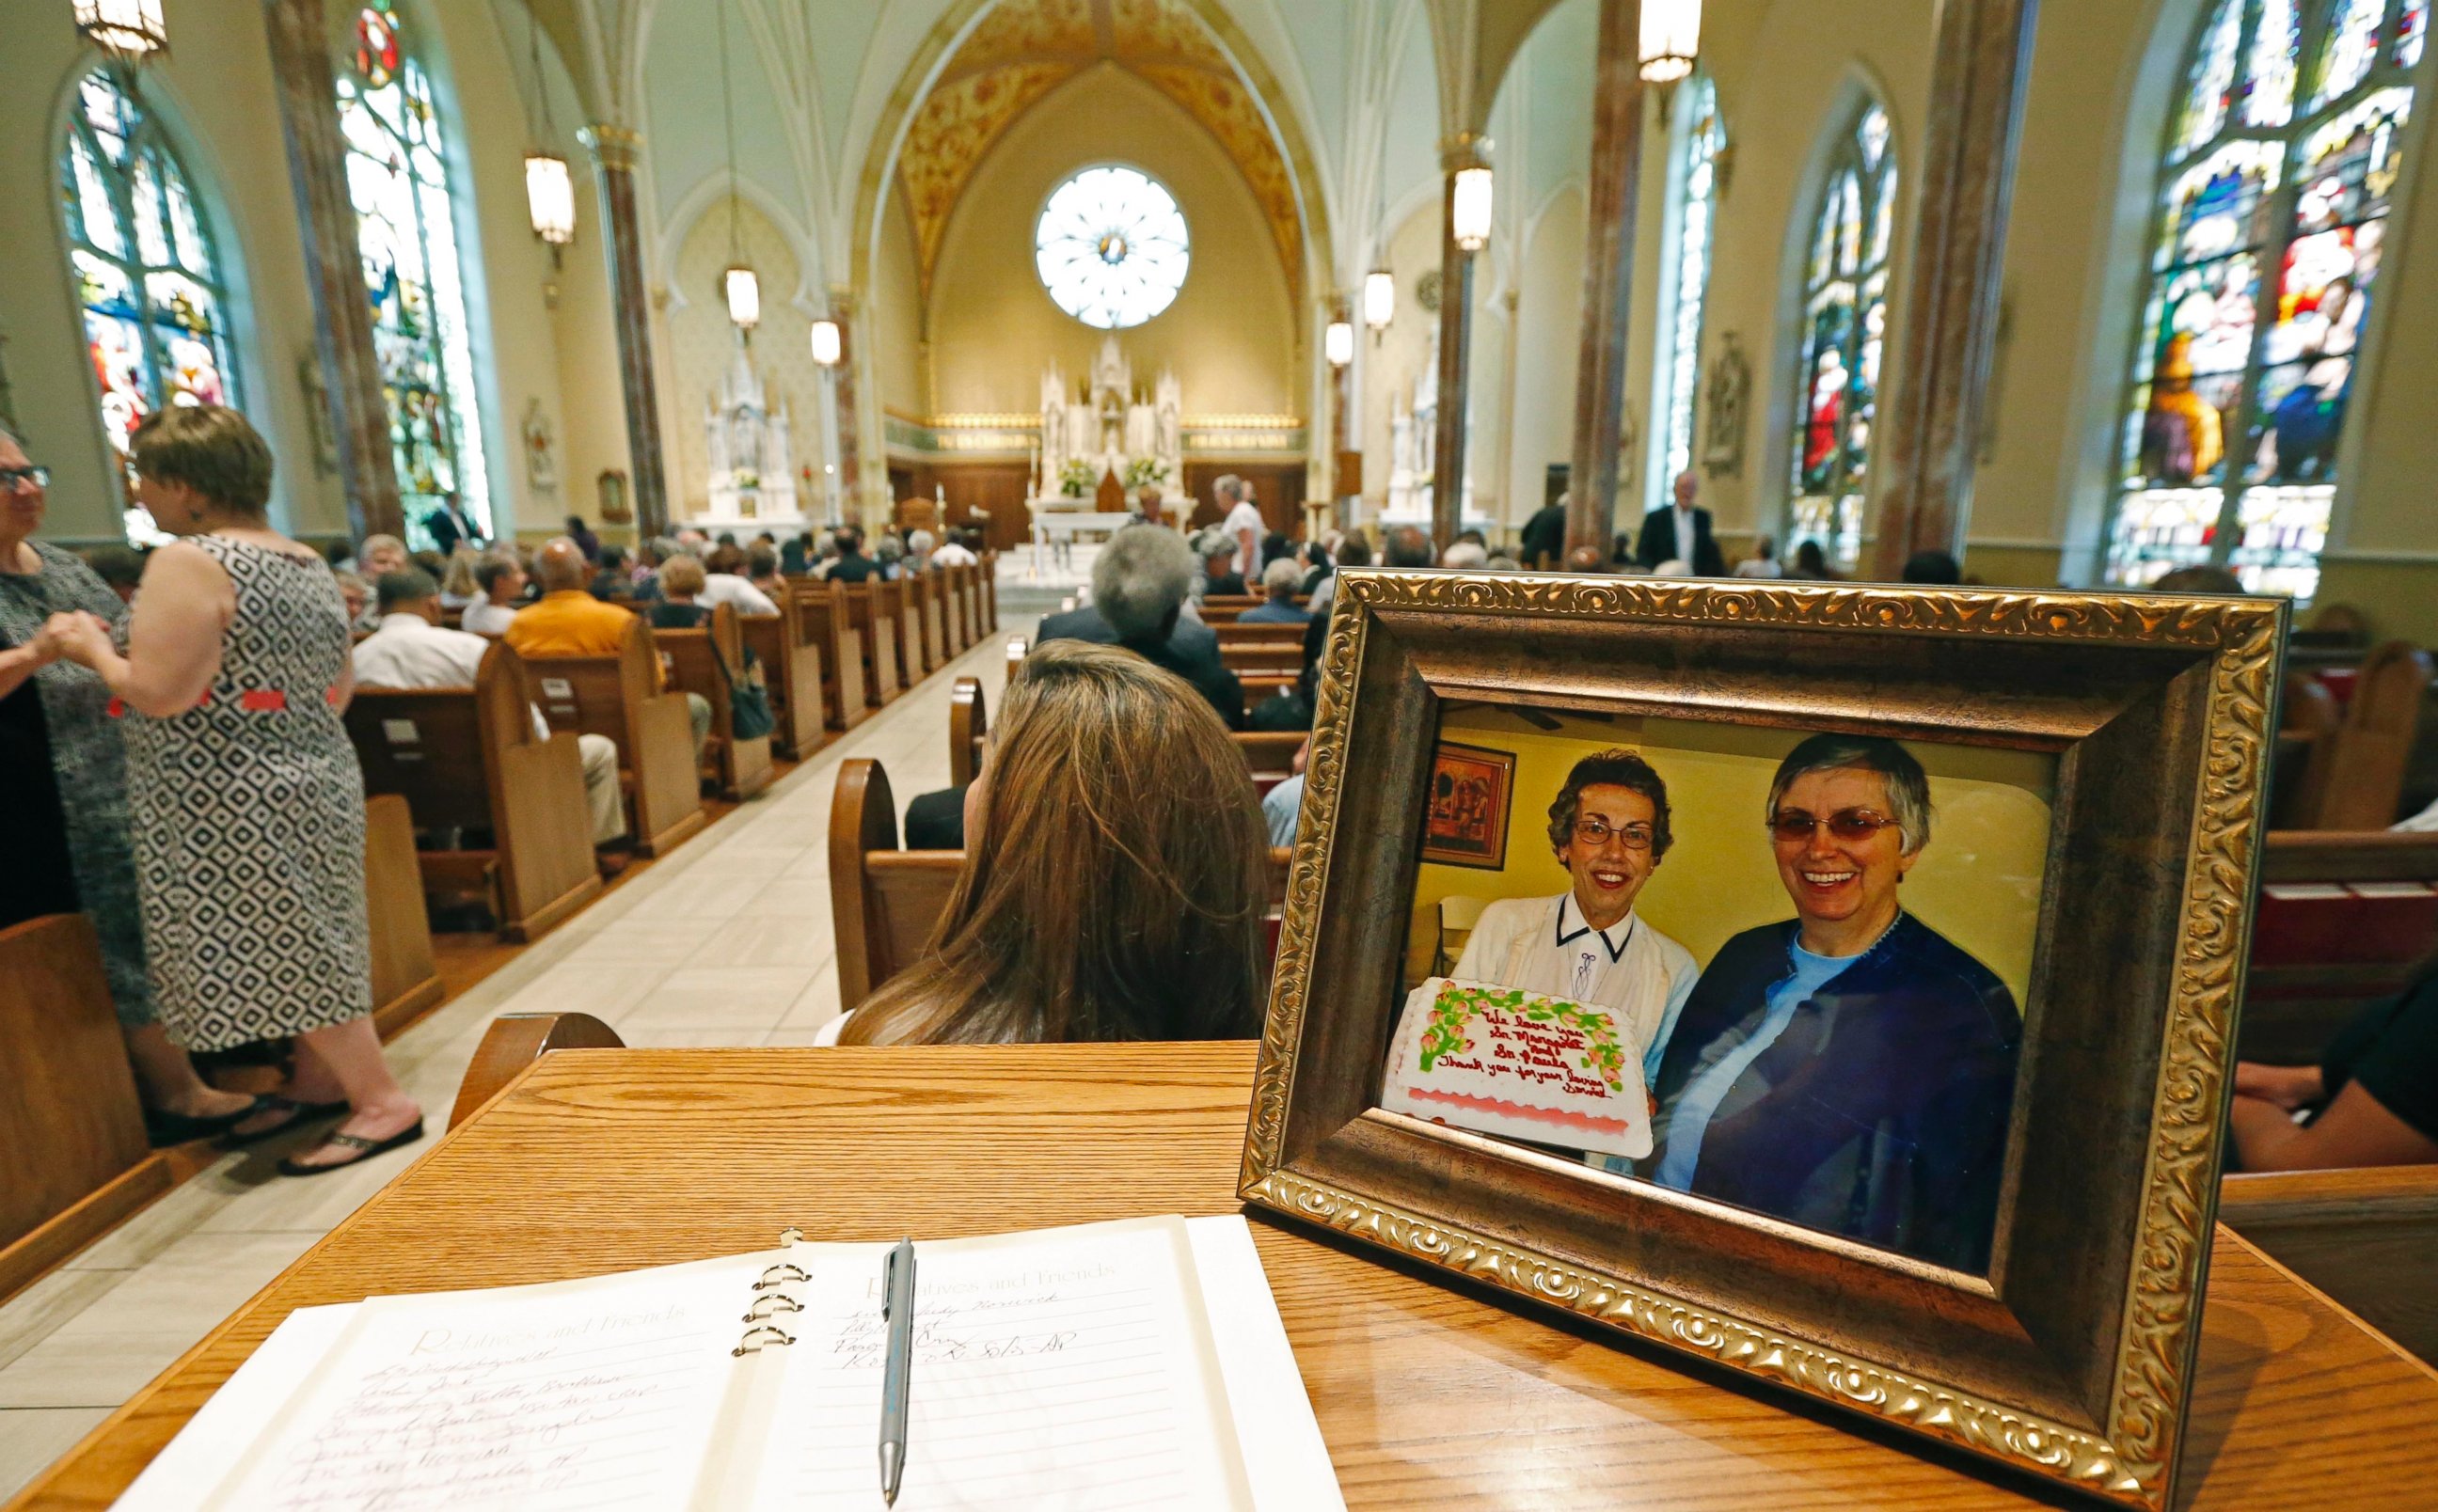 PHOTO: A photograph of Sister Margaret Held of the School Sisters of St. Francis, left, and Sister Paula Merrill, of the Sisters of Charity of Nazareth, is placed at the Cathedral of St. Peter the Apostle, Aug. 29, 2016 in Jackson, Mississippi.